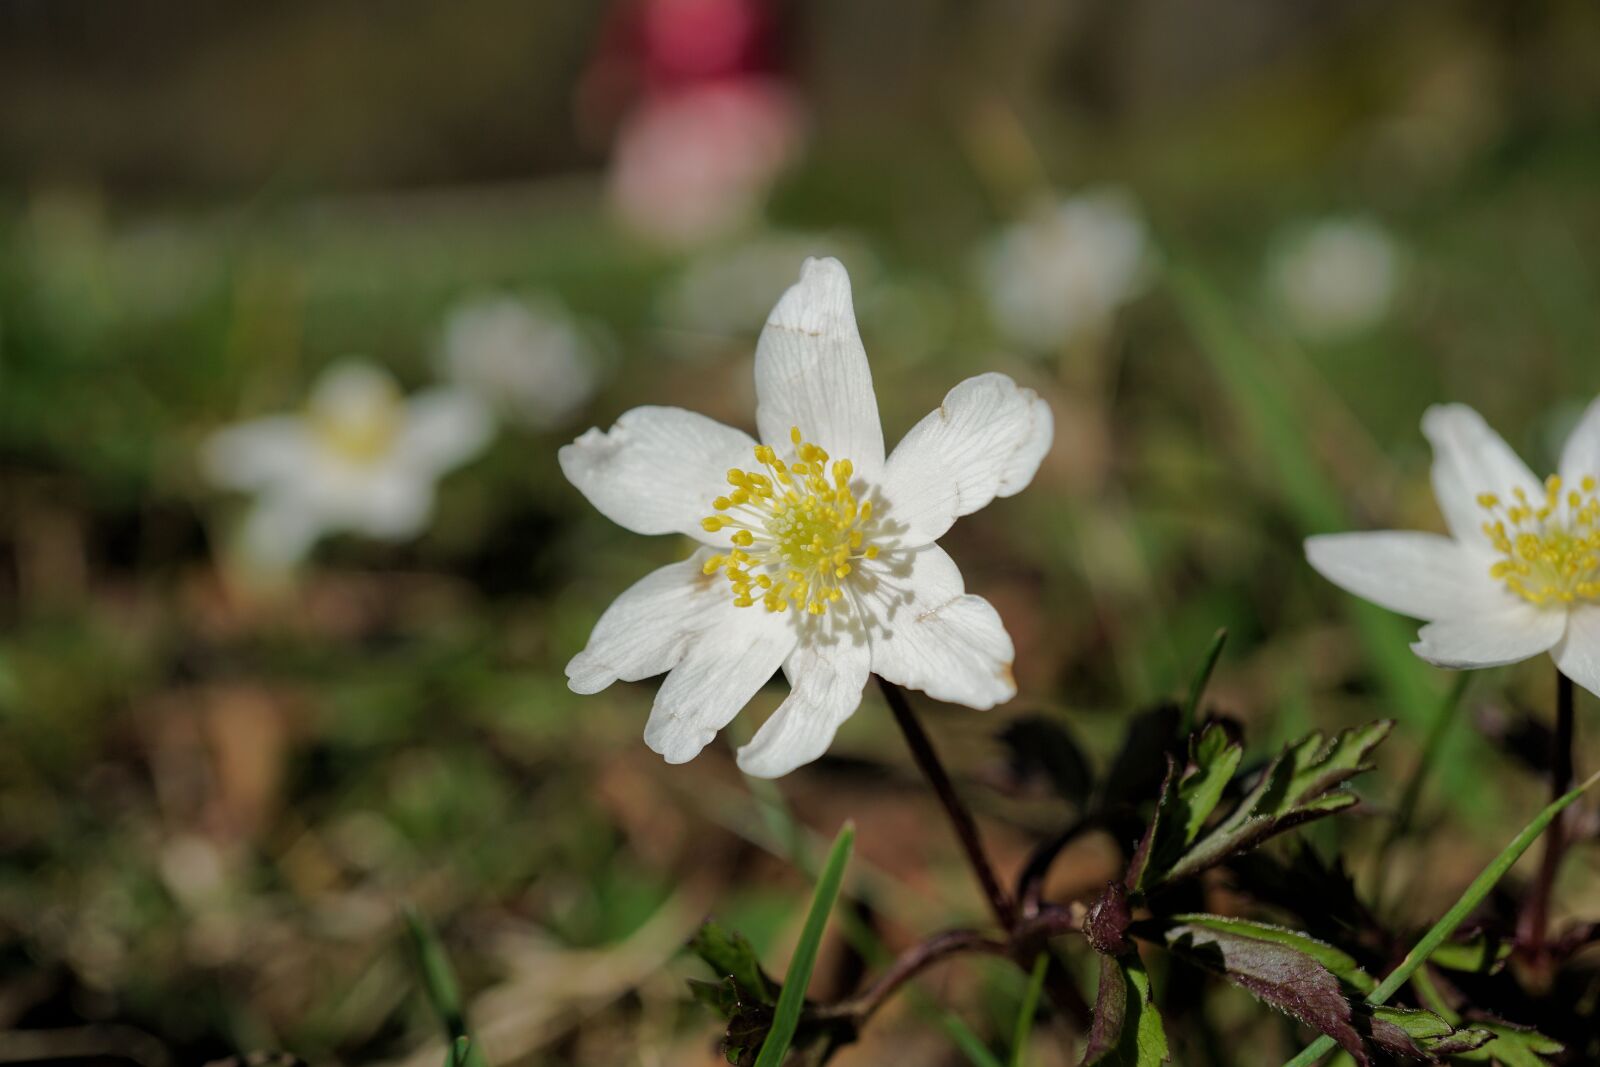 Sony a6000 sample photo. Flower, spring, nature photography